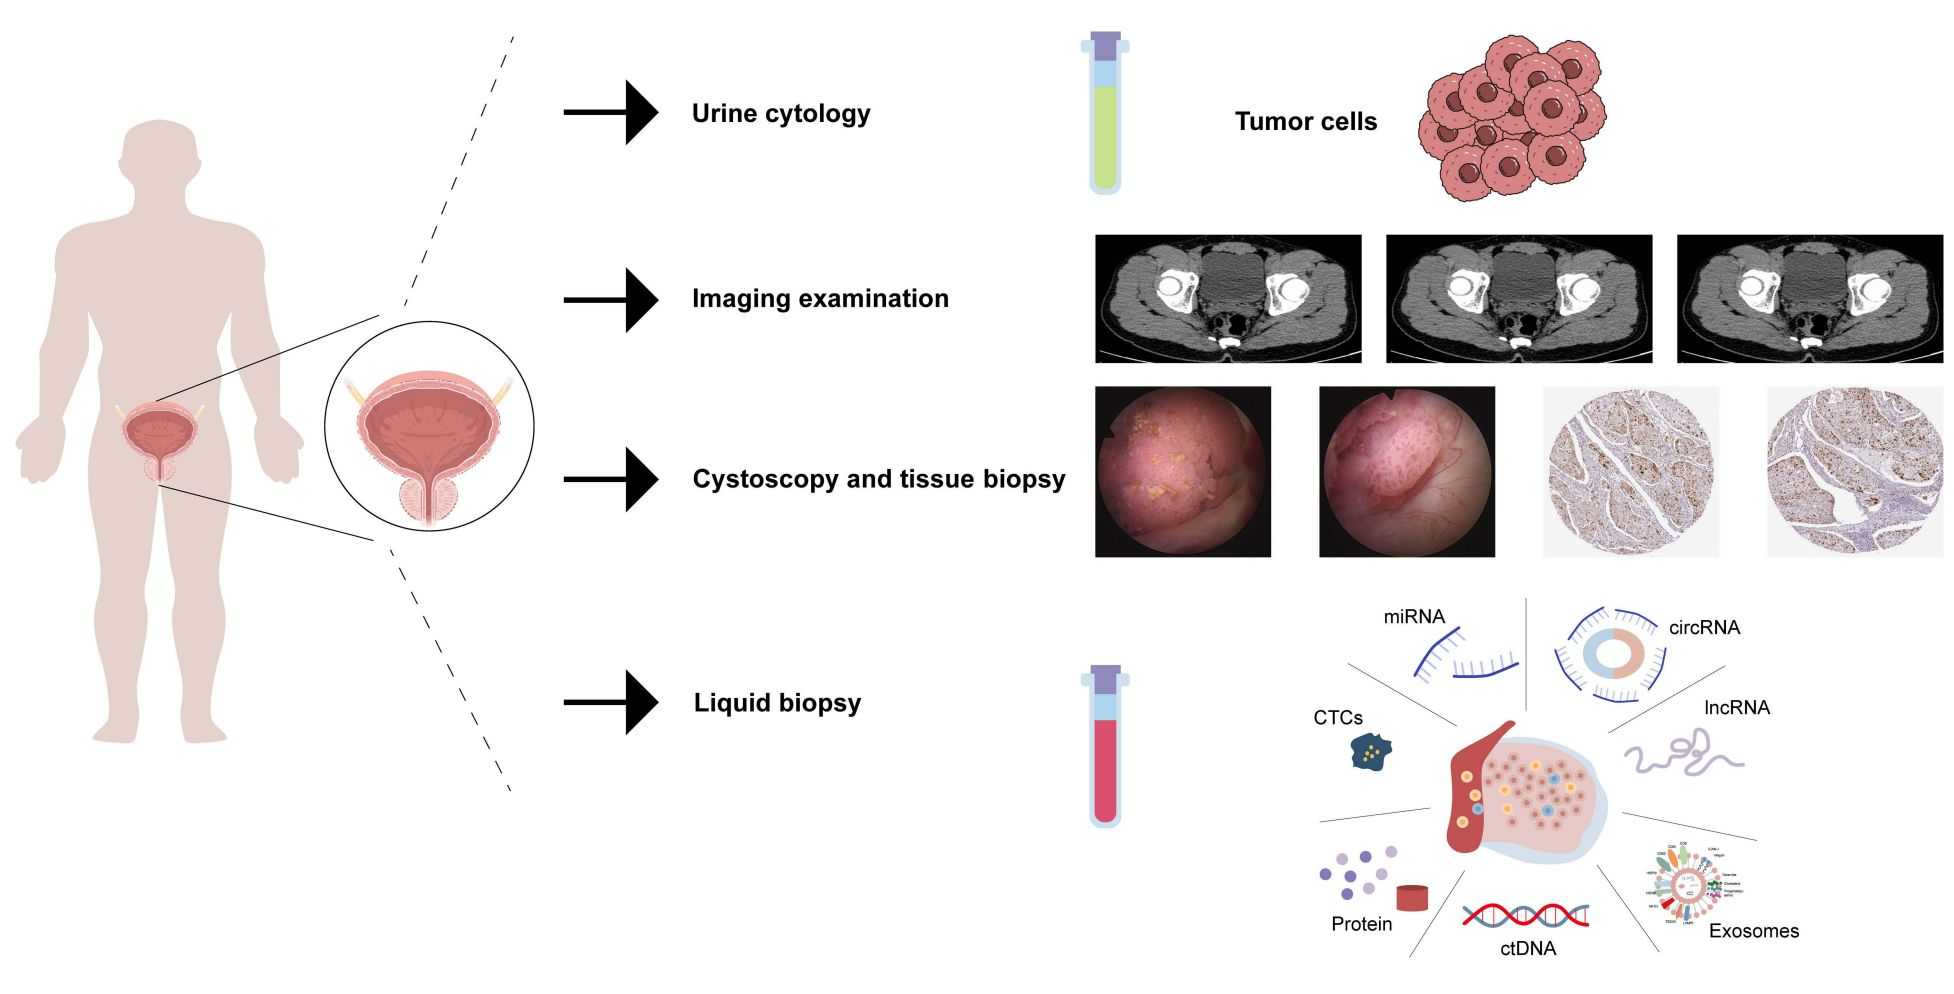 Figure 2. The role of exosomes in prostate cancer progression.